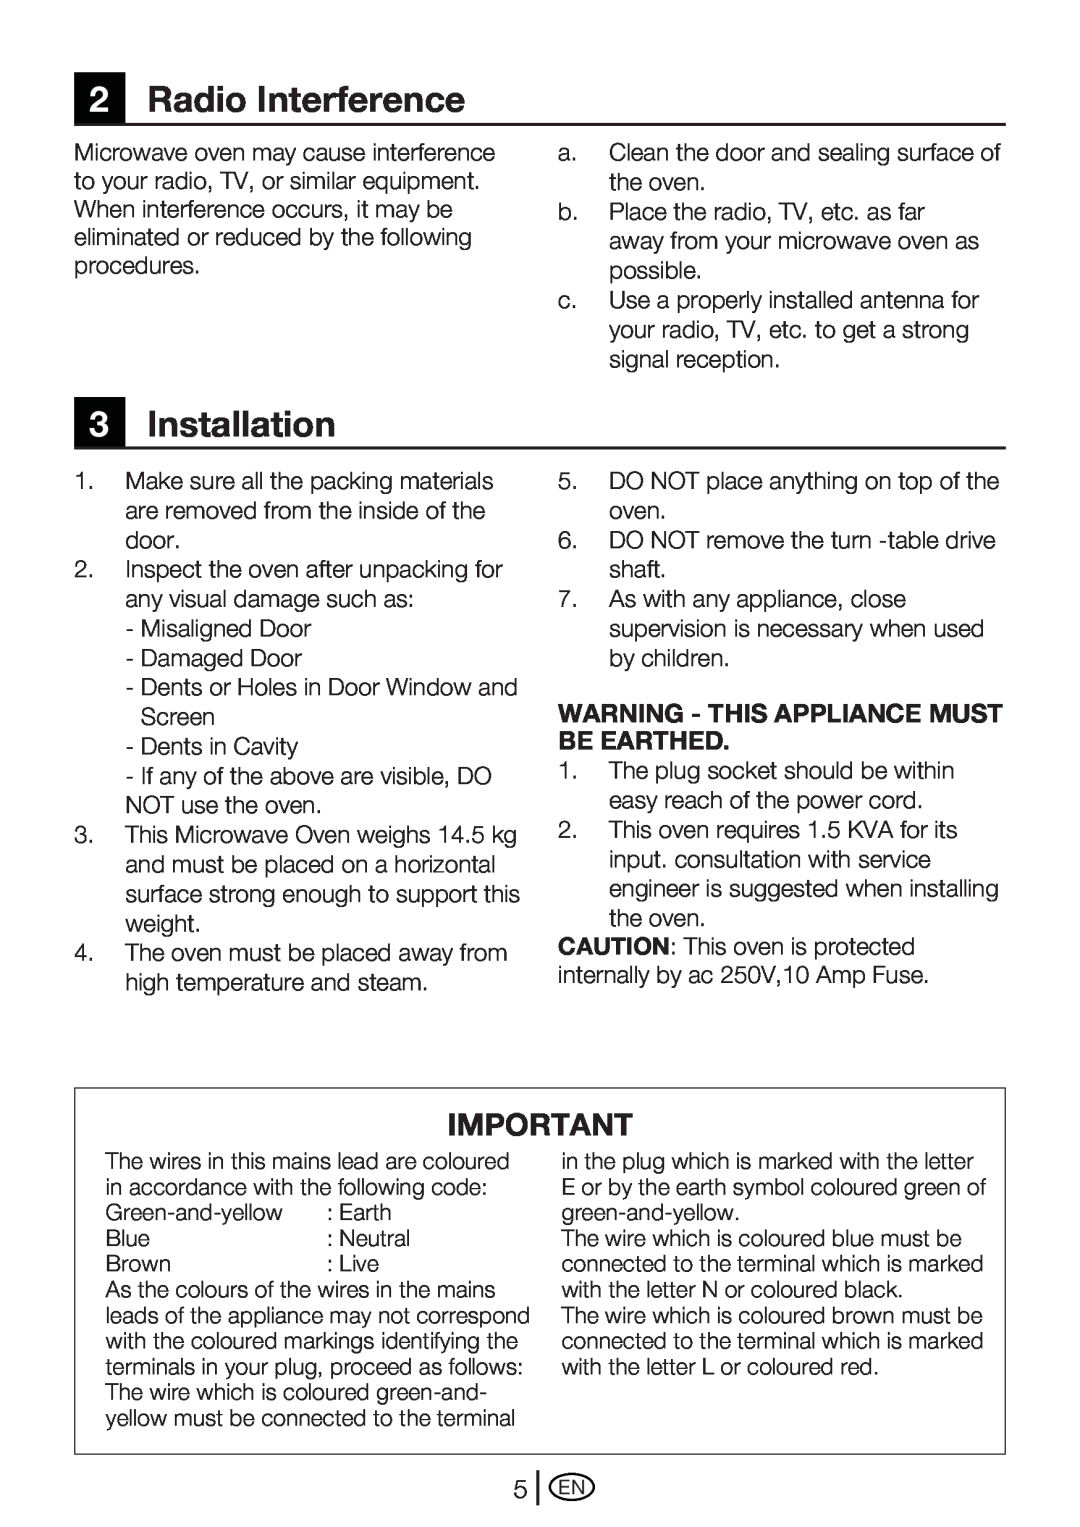 Beko MWB 2510 EX instruction manual 2Radio Interference, 3Installation, Warning - This Appliance Must Be Earthed 